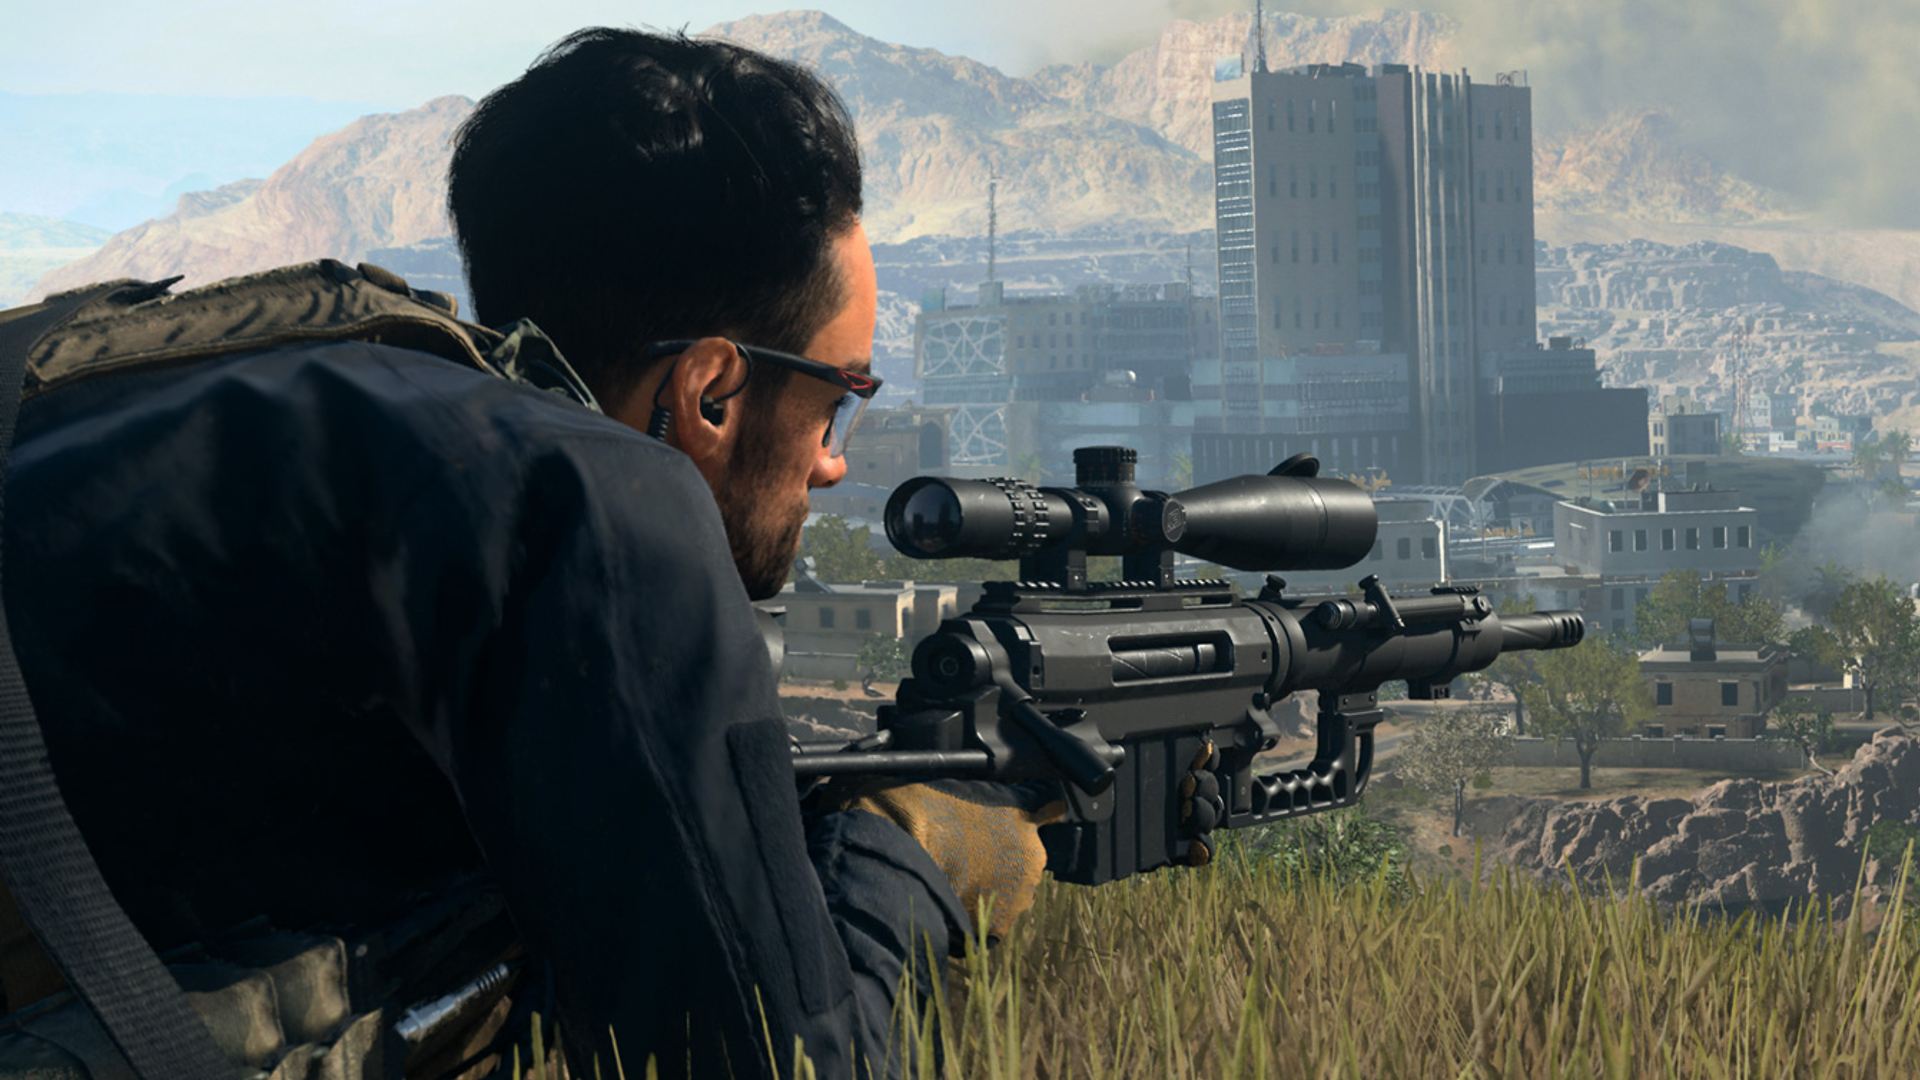 Warzone 2 Snipers Should Be 1 Shot Headshot: Fans Overwhelmingly Agree